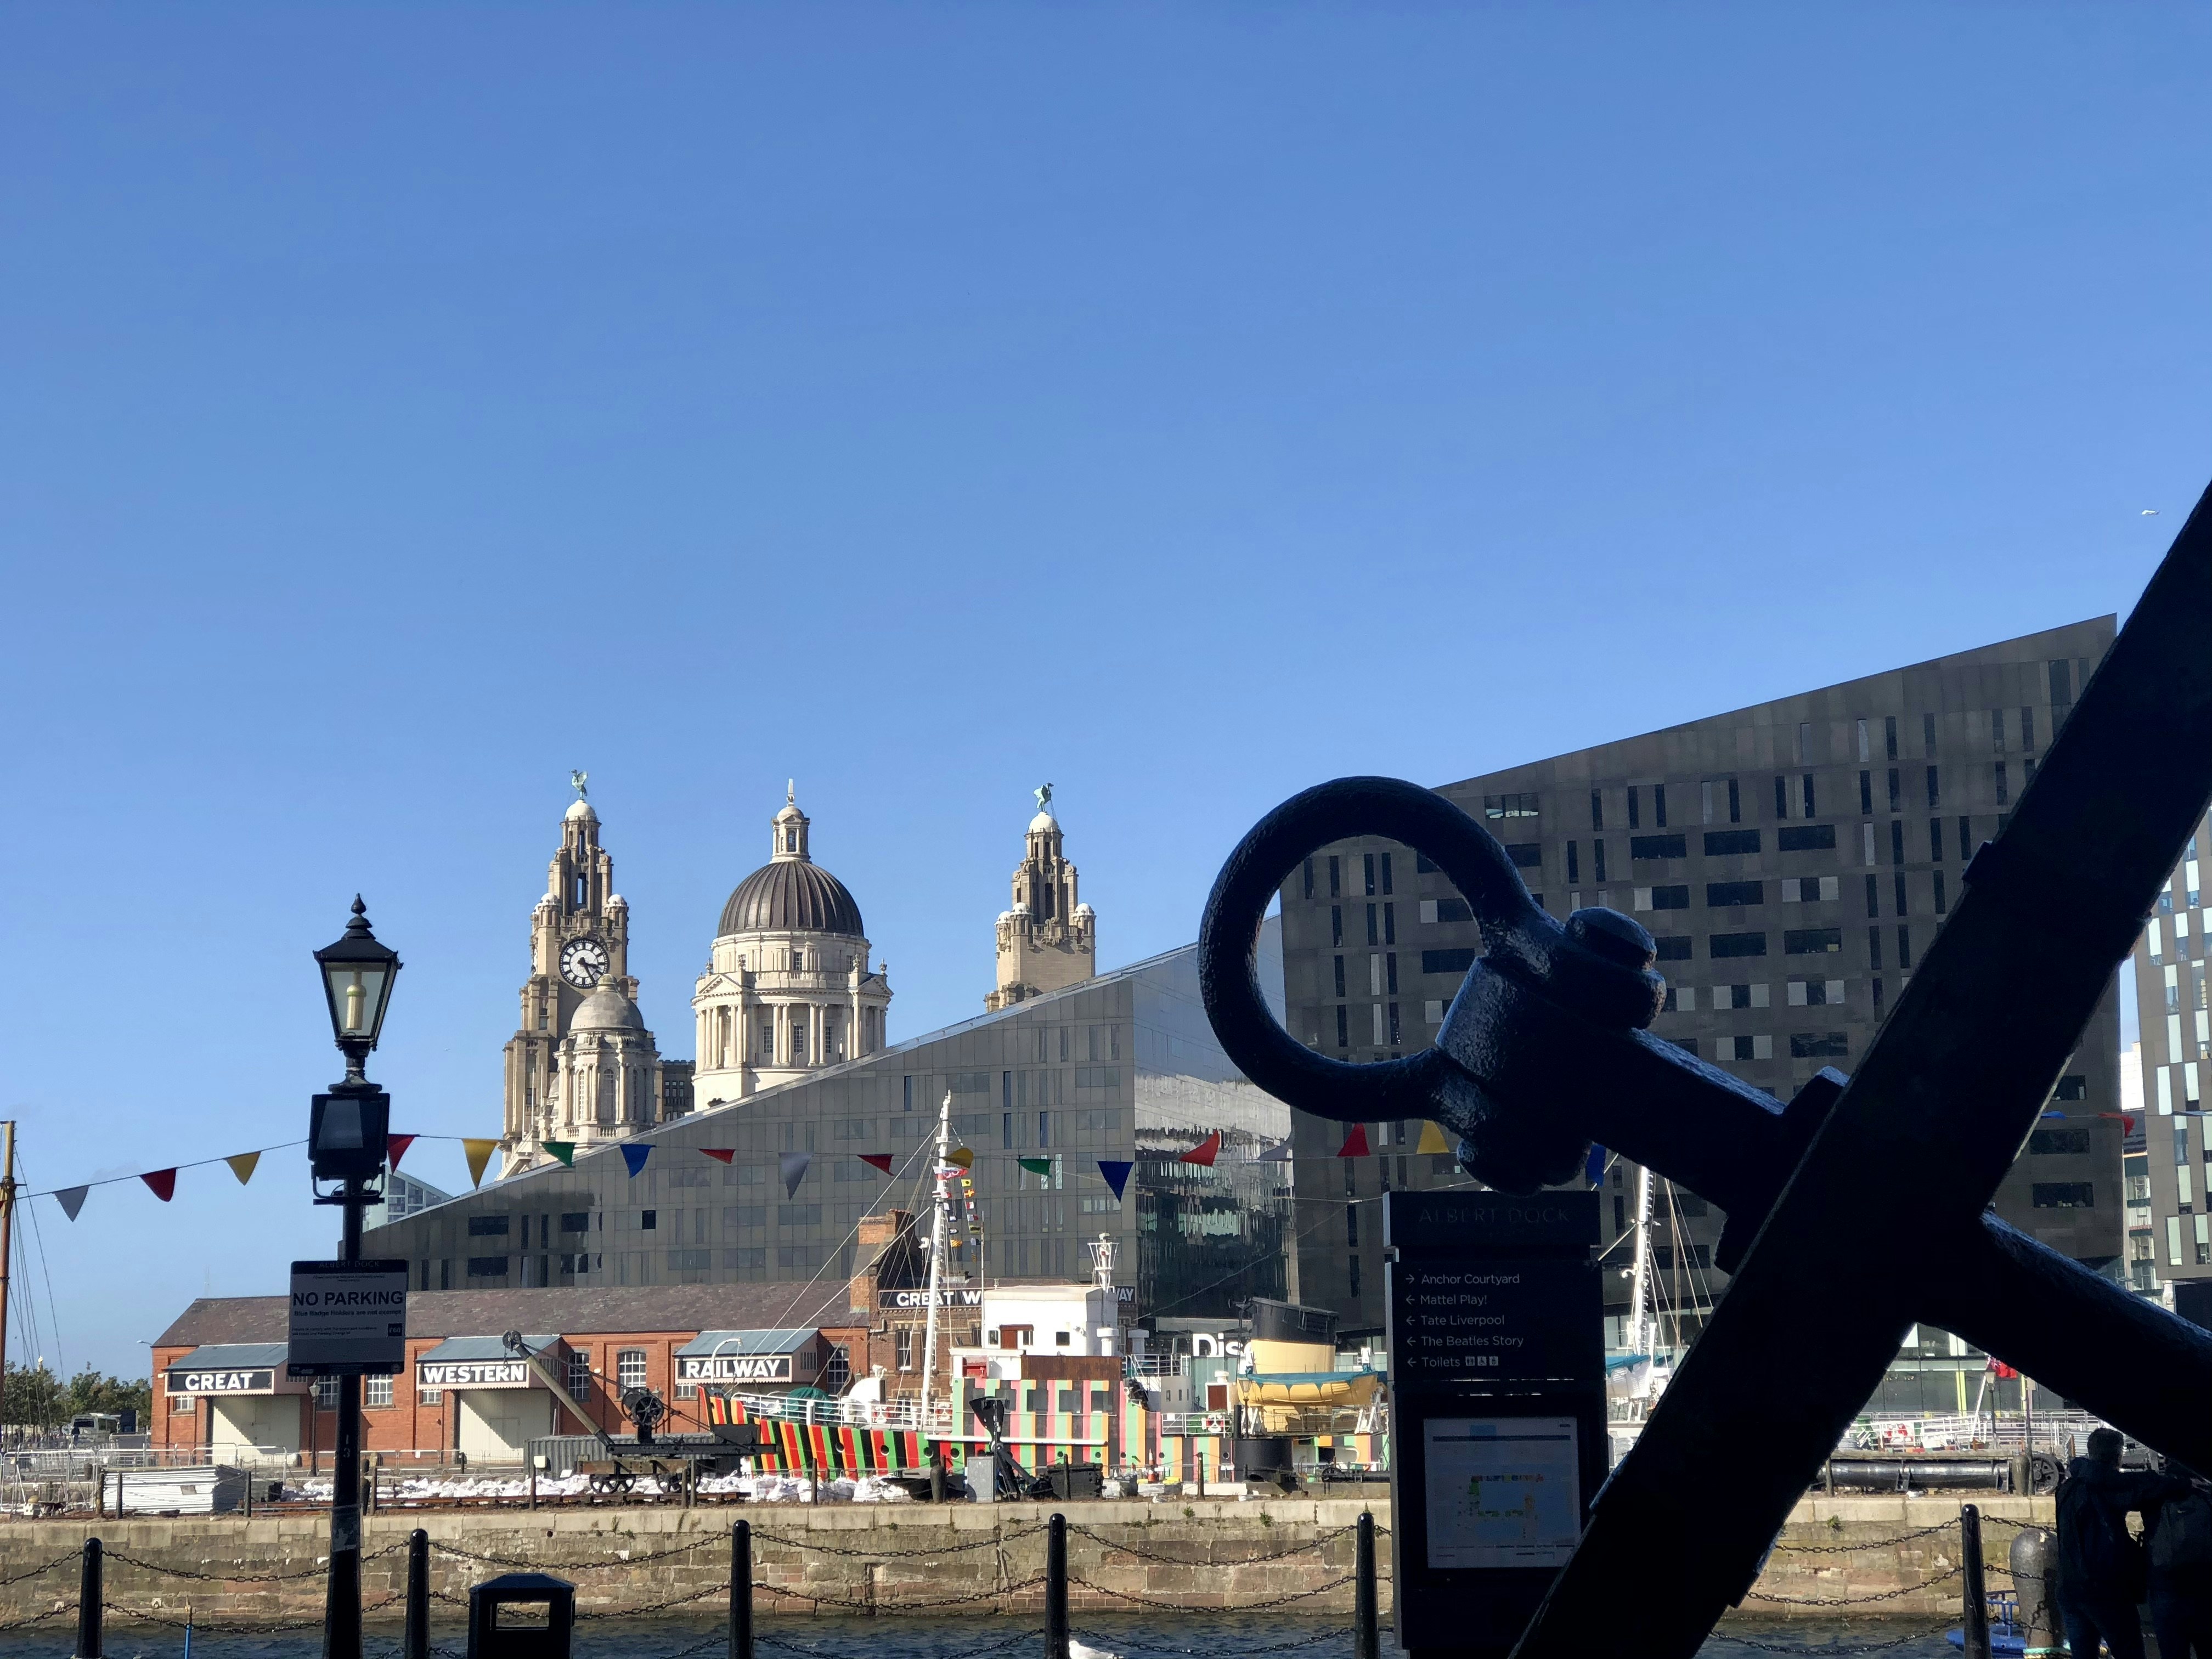 A snapshot view of the Liverpool docks.